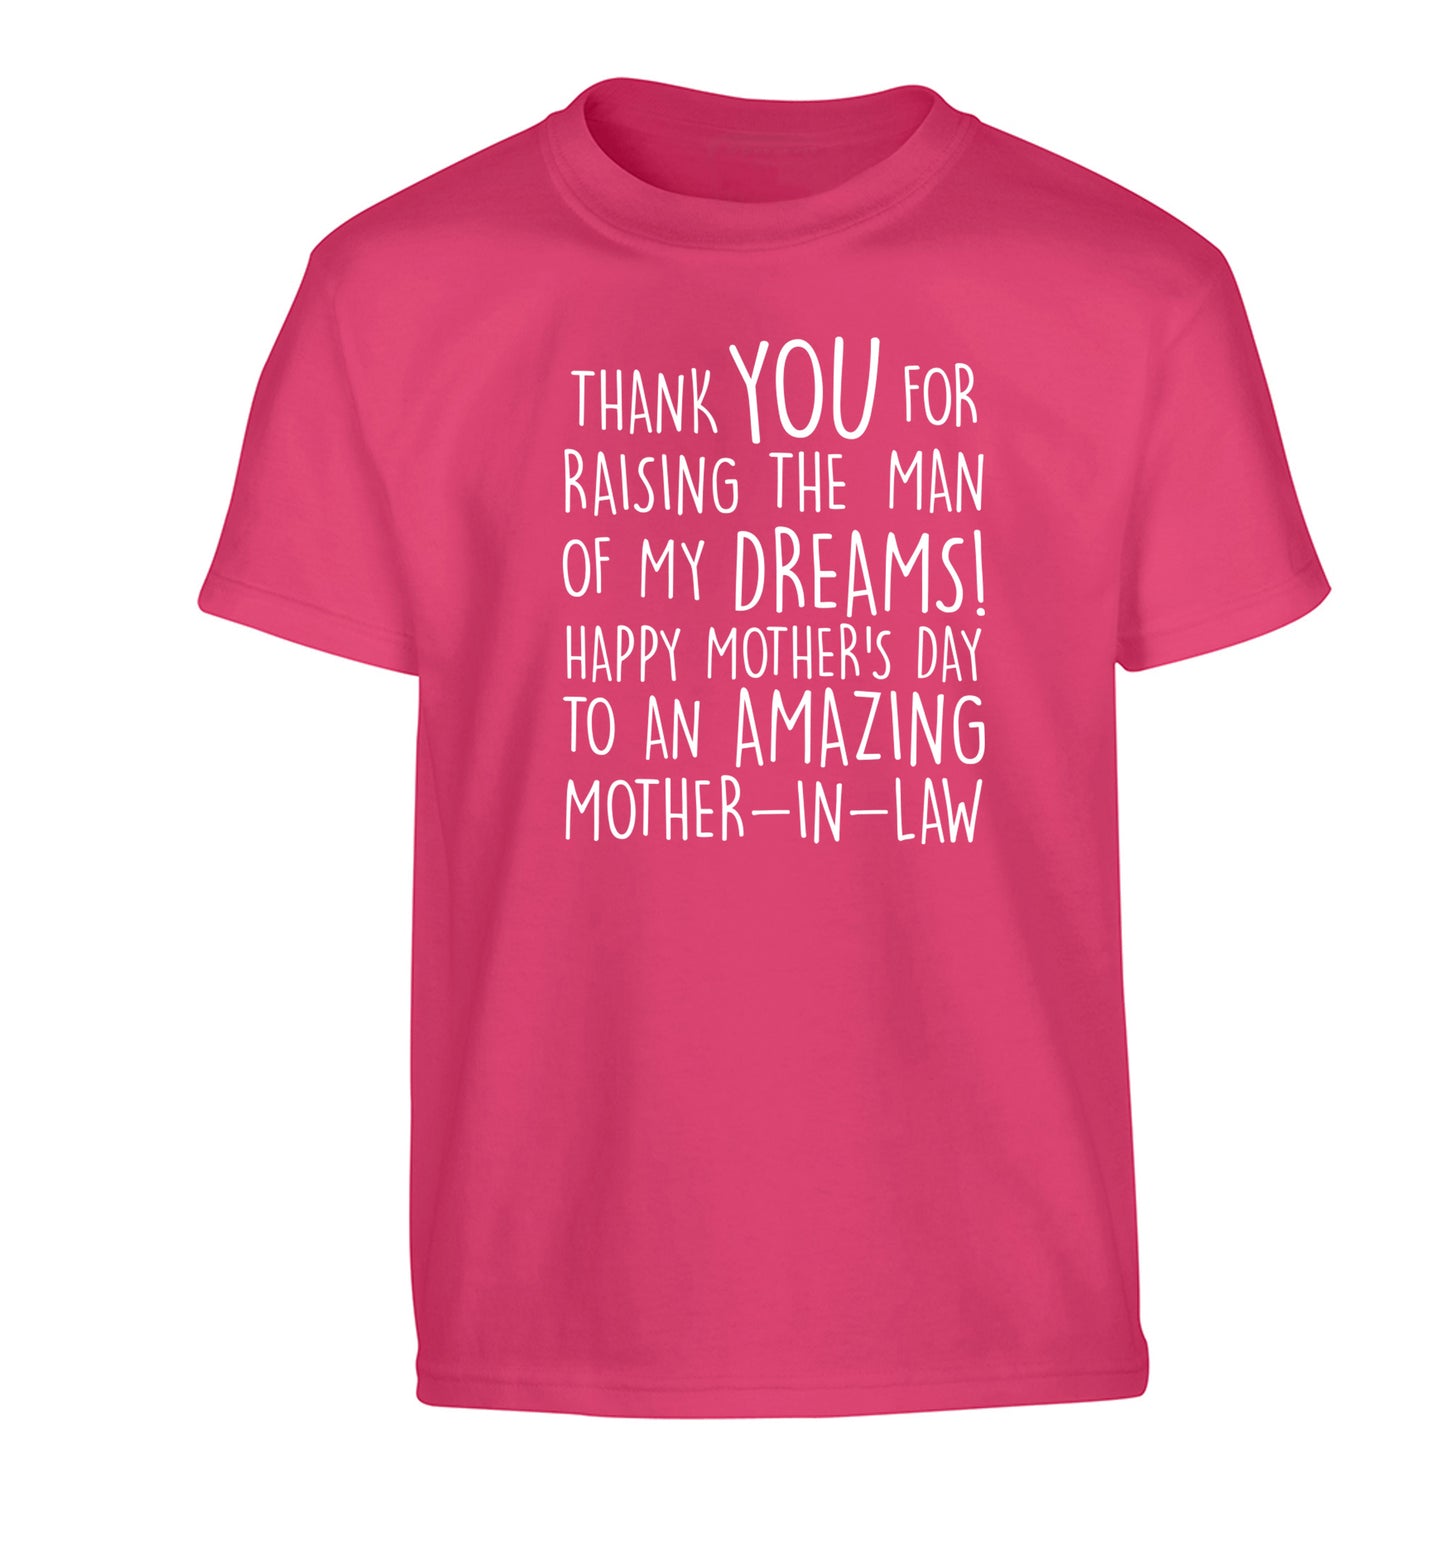 Thank you for raising the man of my dreams happy mother's day mother-in-law Children's pink Tshirt 12-13 Years